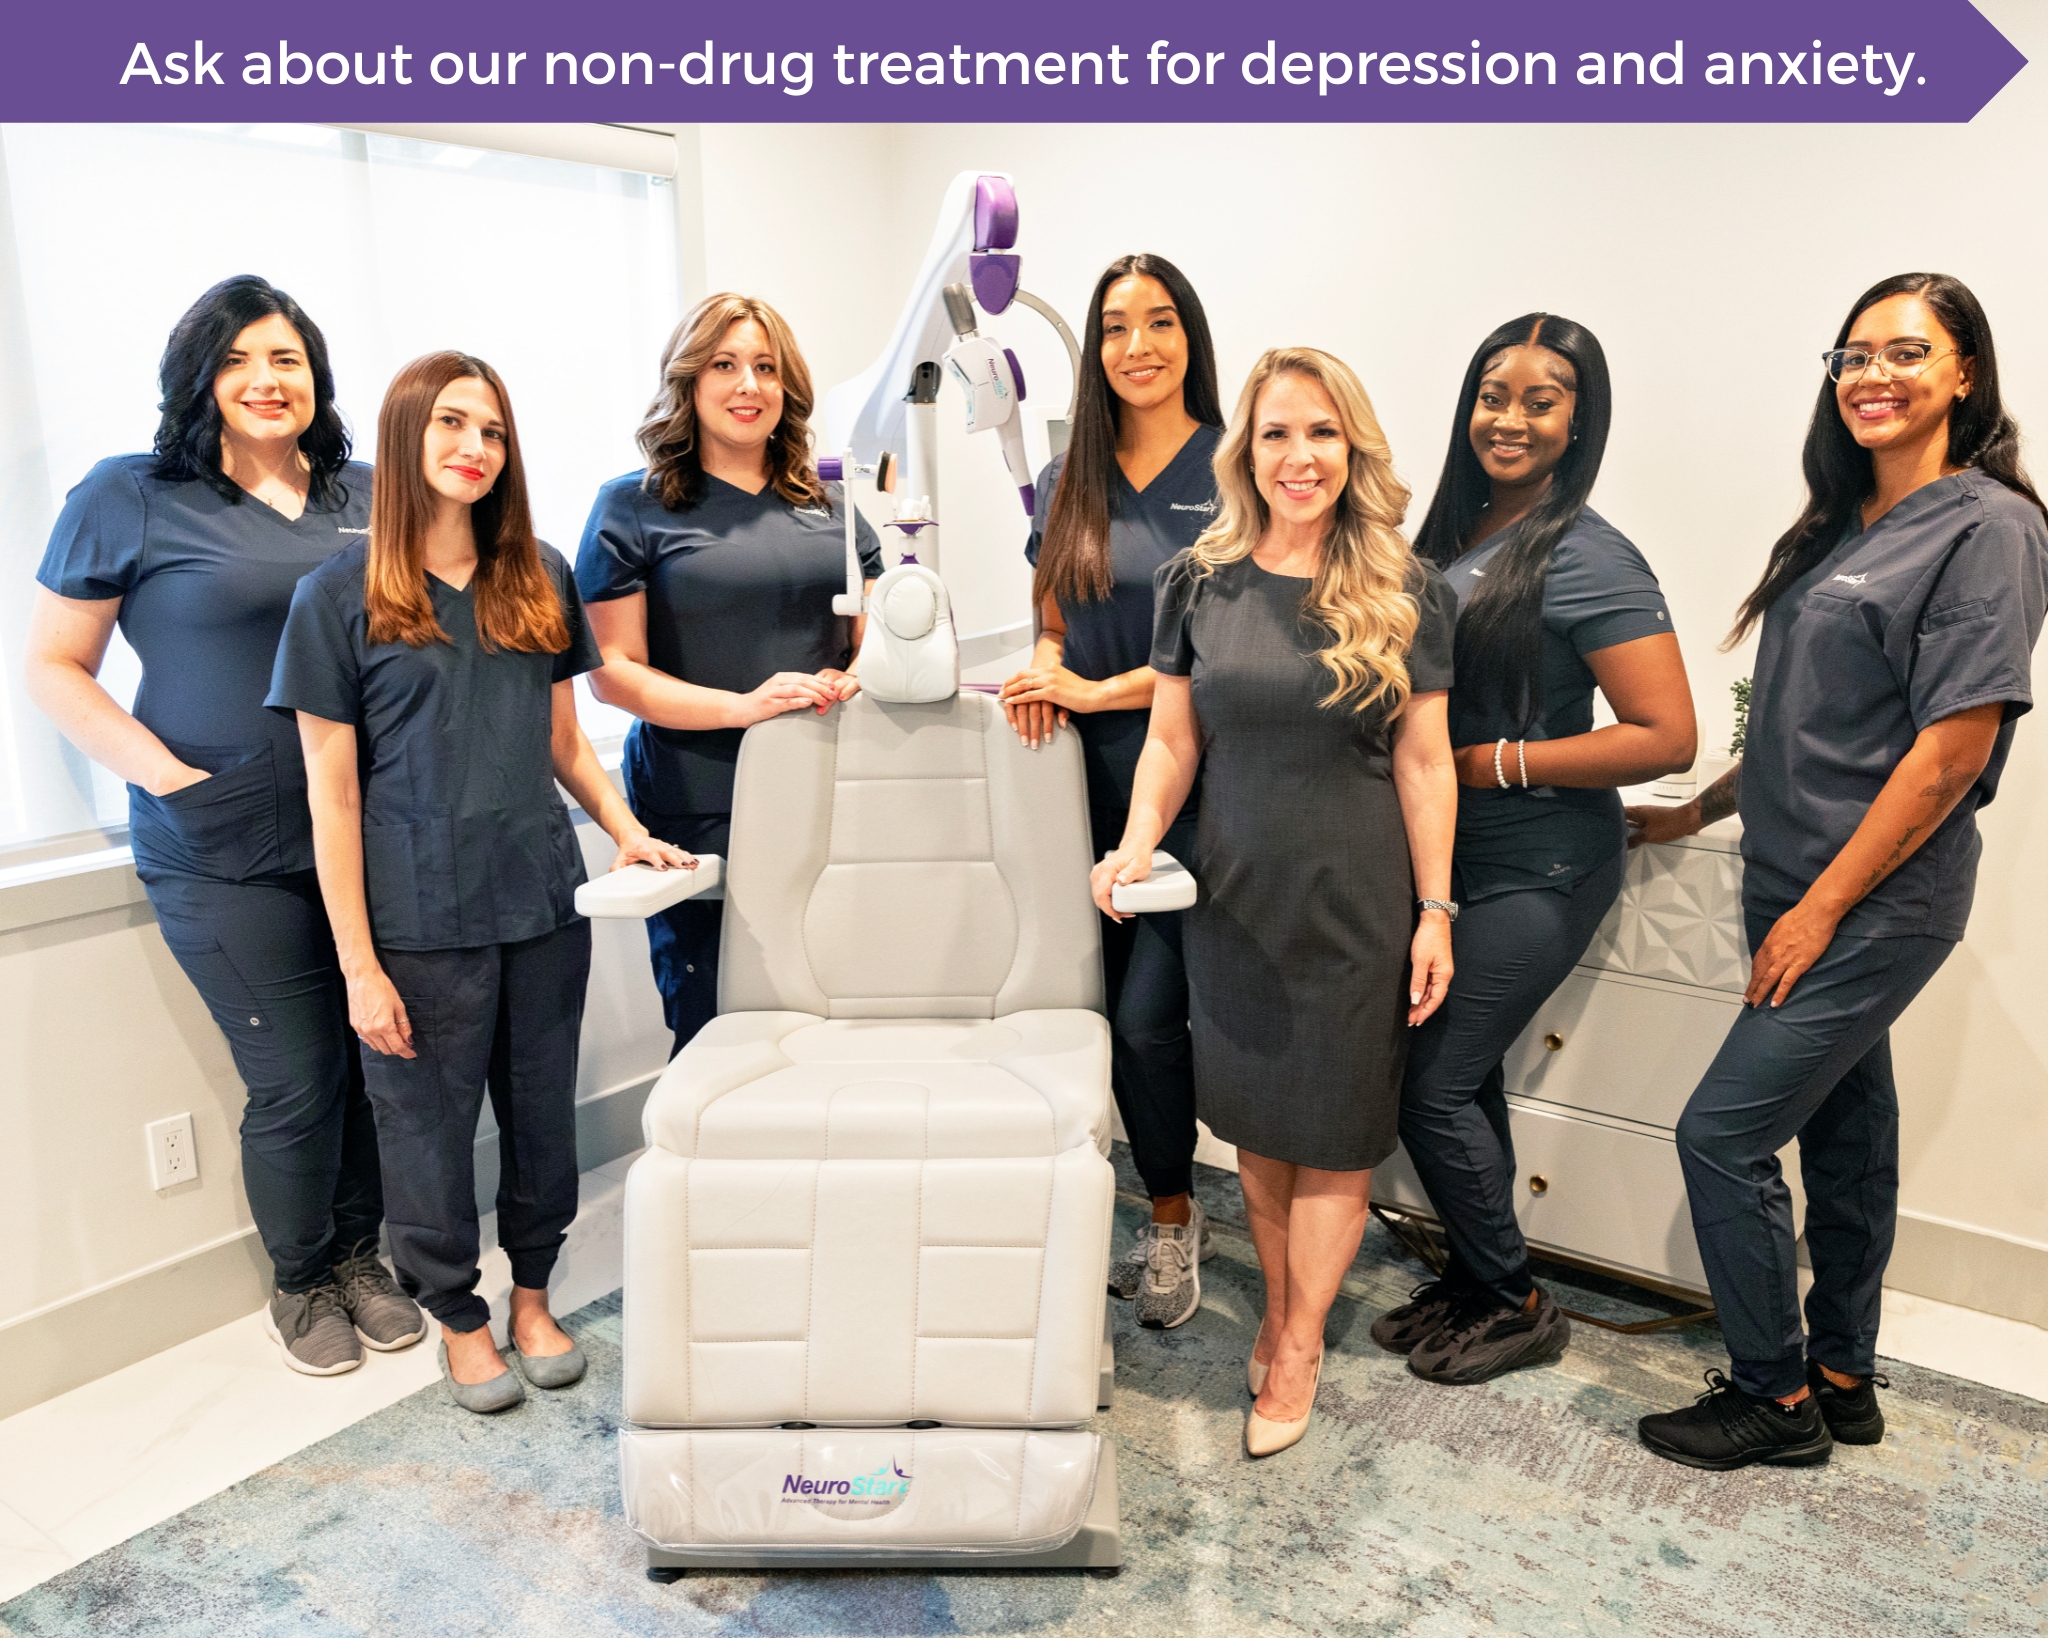 Ask about our non-drug treatment for depression and anxiety.